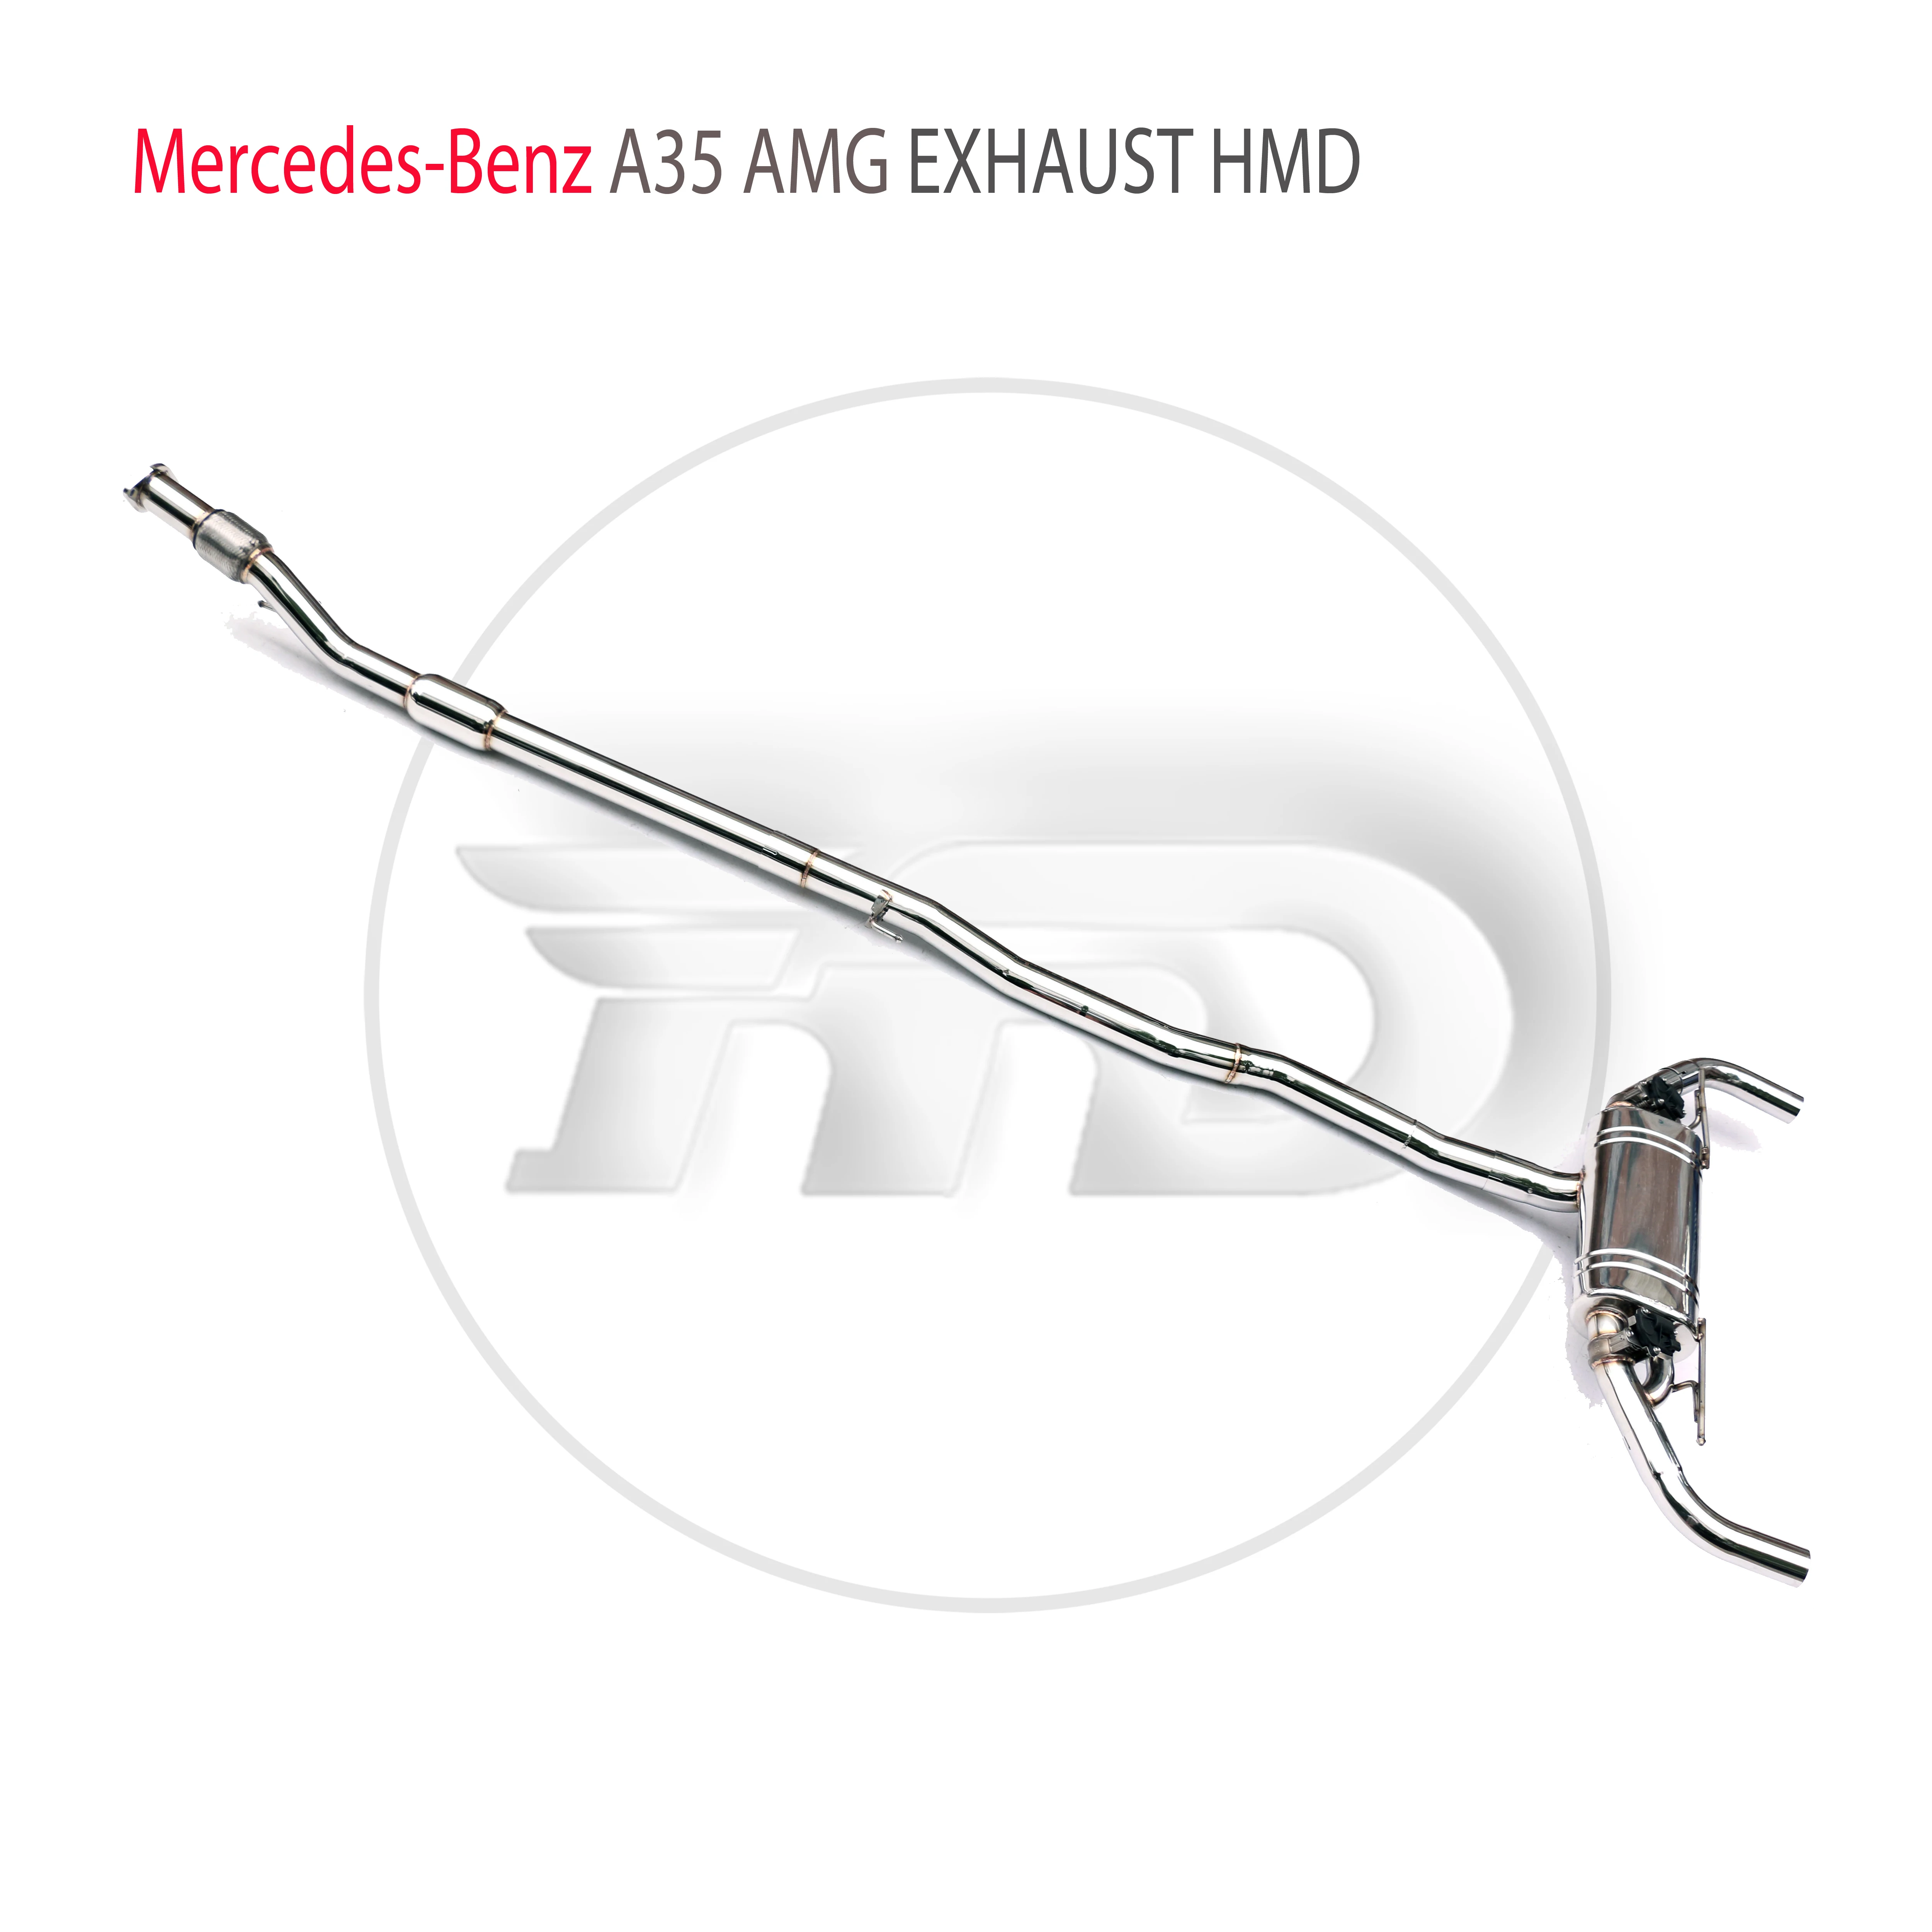 

HMD Stainless Steel Exhaust System Performance Catback For Mercedes Benz A35 AMG Car Muffler